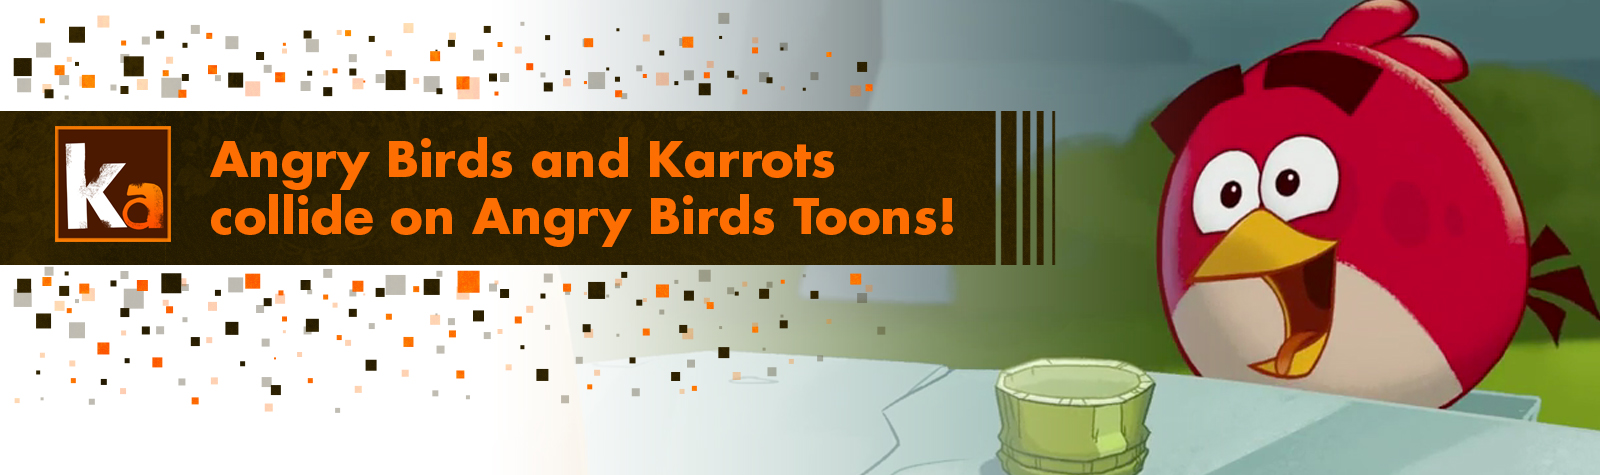 Angry Birds and Karrots collide on Angry Birds Toons!